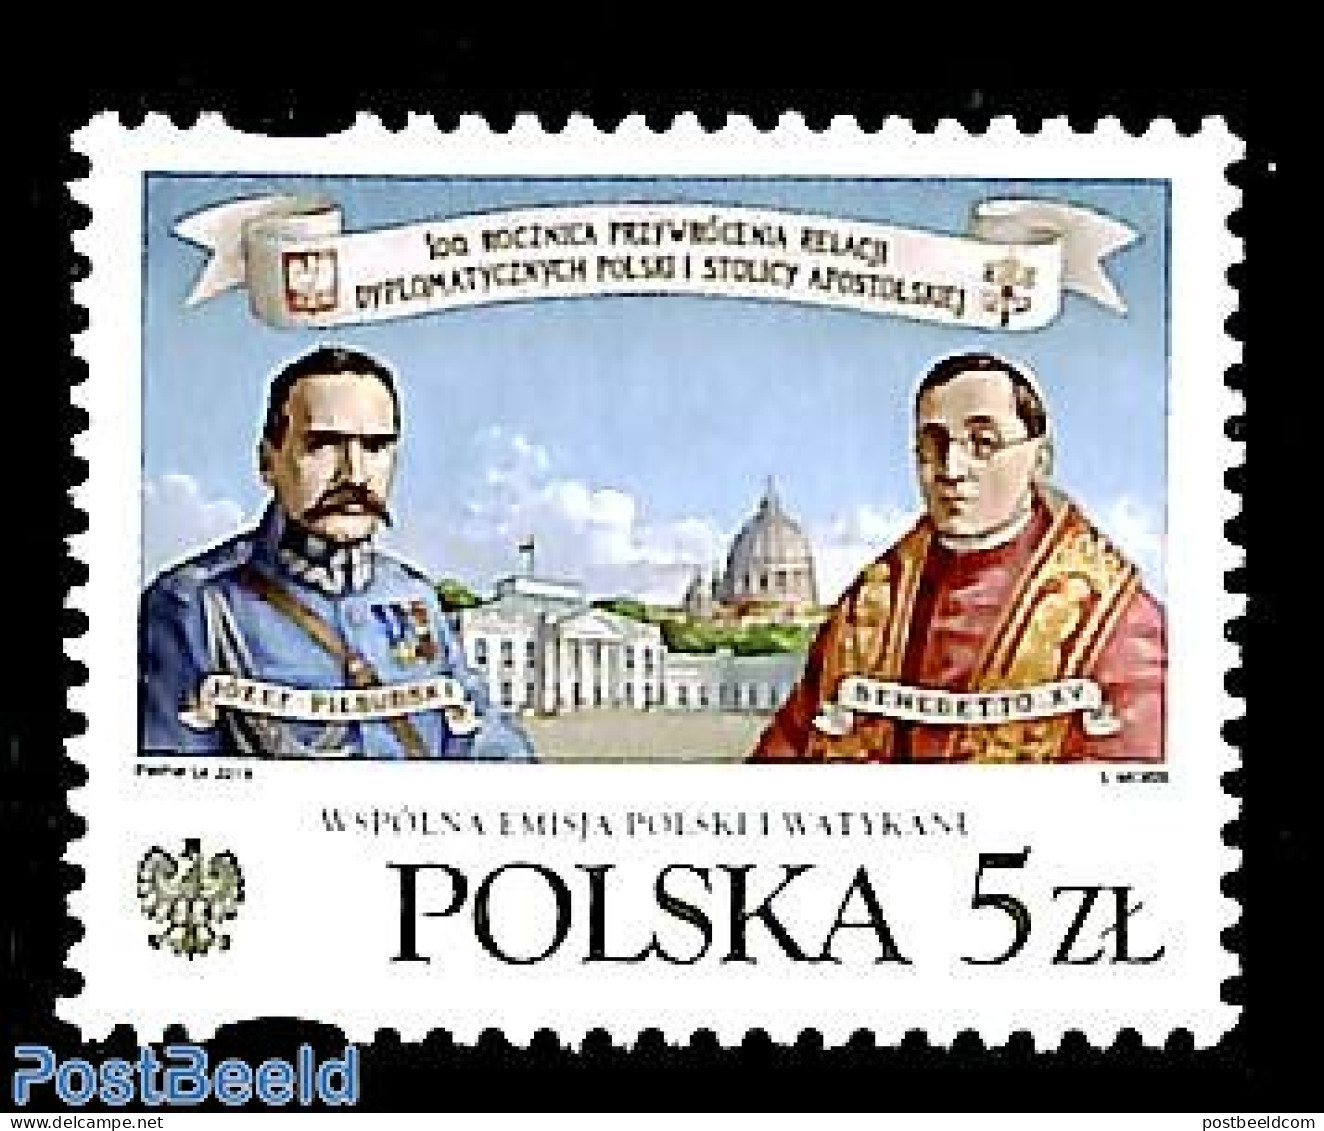 Poland 2019 Diplomatic Relations With Vatican 1v, Mint NH, Religion - Various - Religion - Joint Issues - Ungebraucht